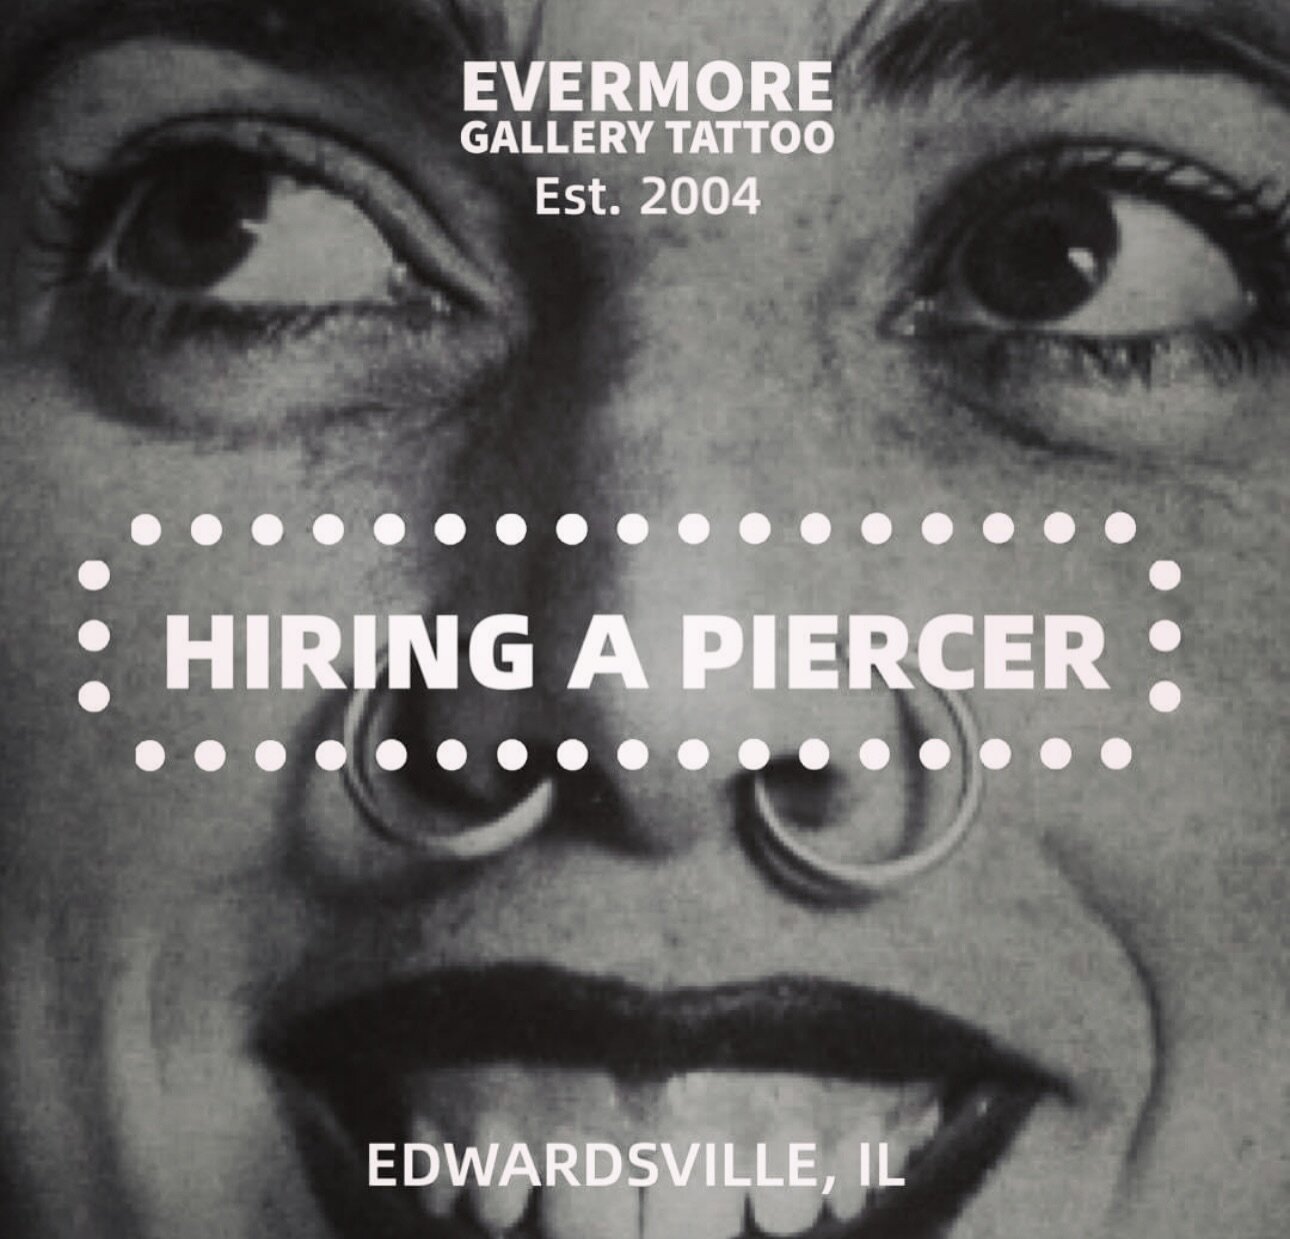 We are hiring ! We are a busy street shop with tons of walk-ins. Looking for a piercer with experience. Portfolio is required! Email us now evermoregallerytattoo@gmail.com